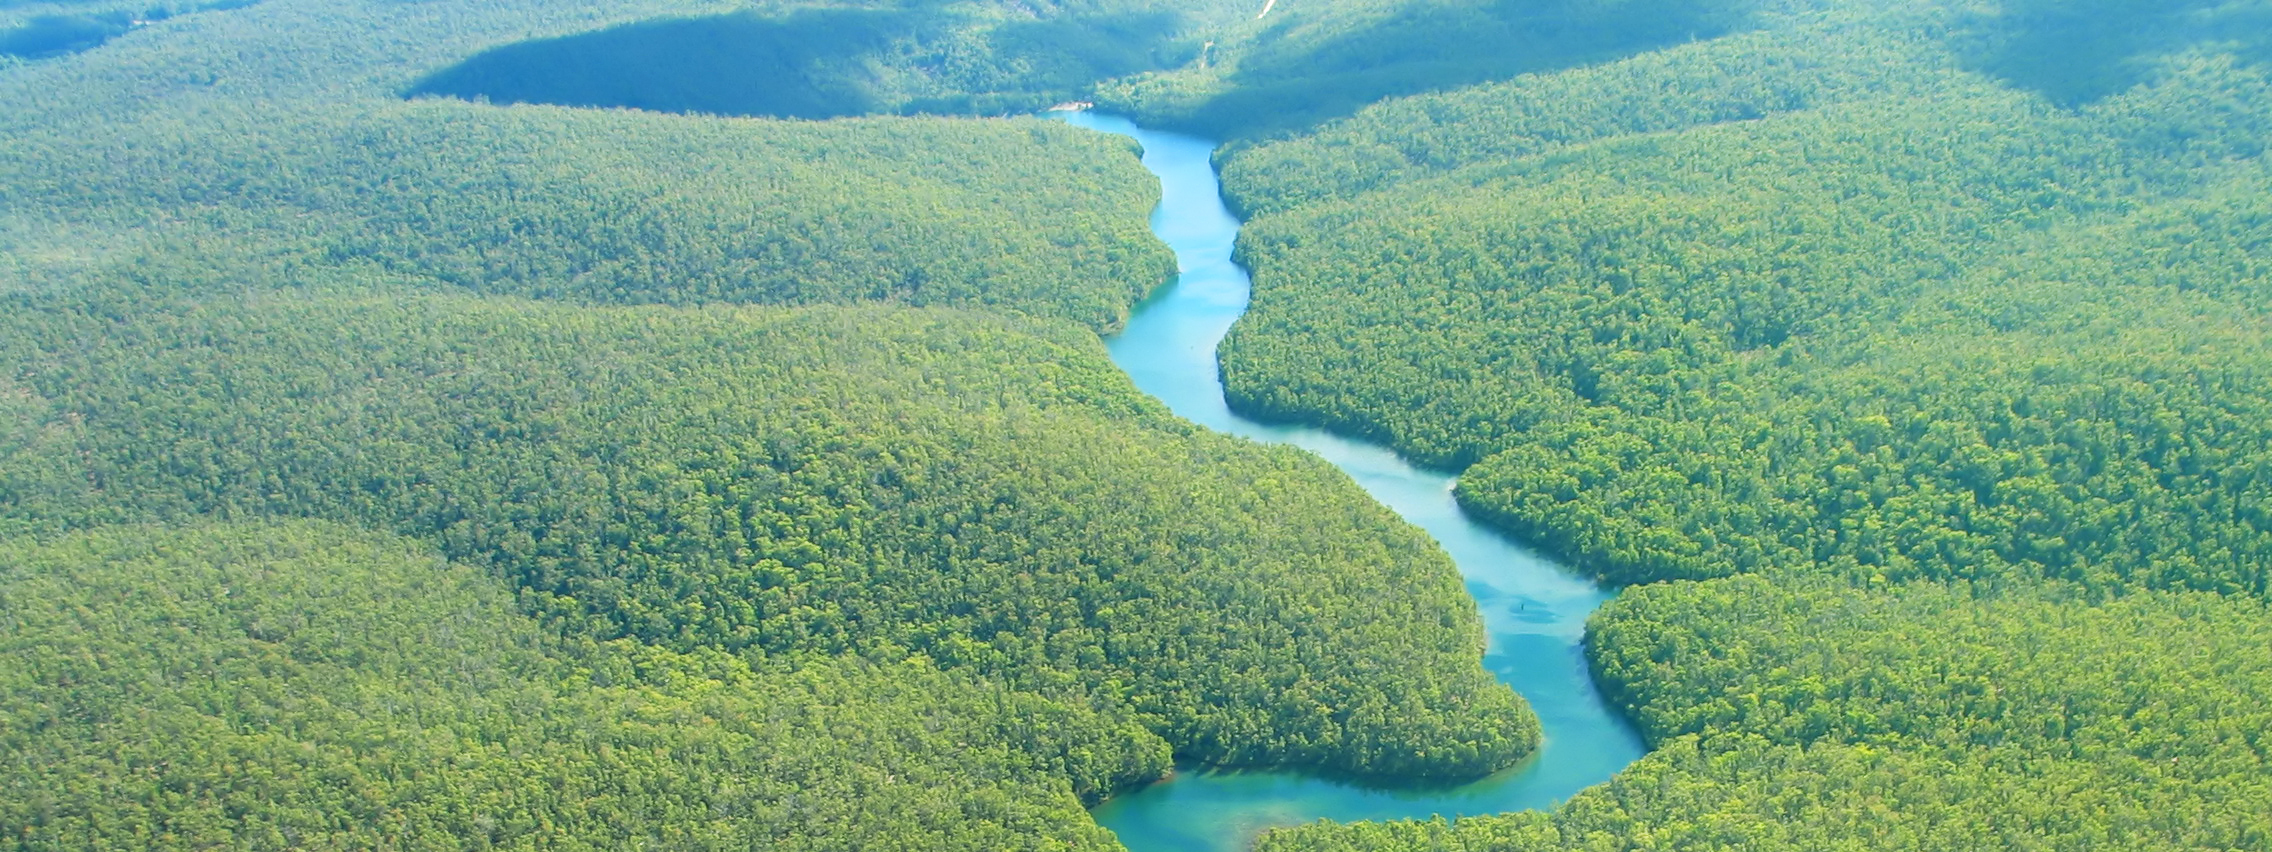 Greenery and River Aerial Photo